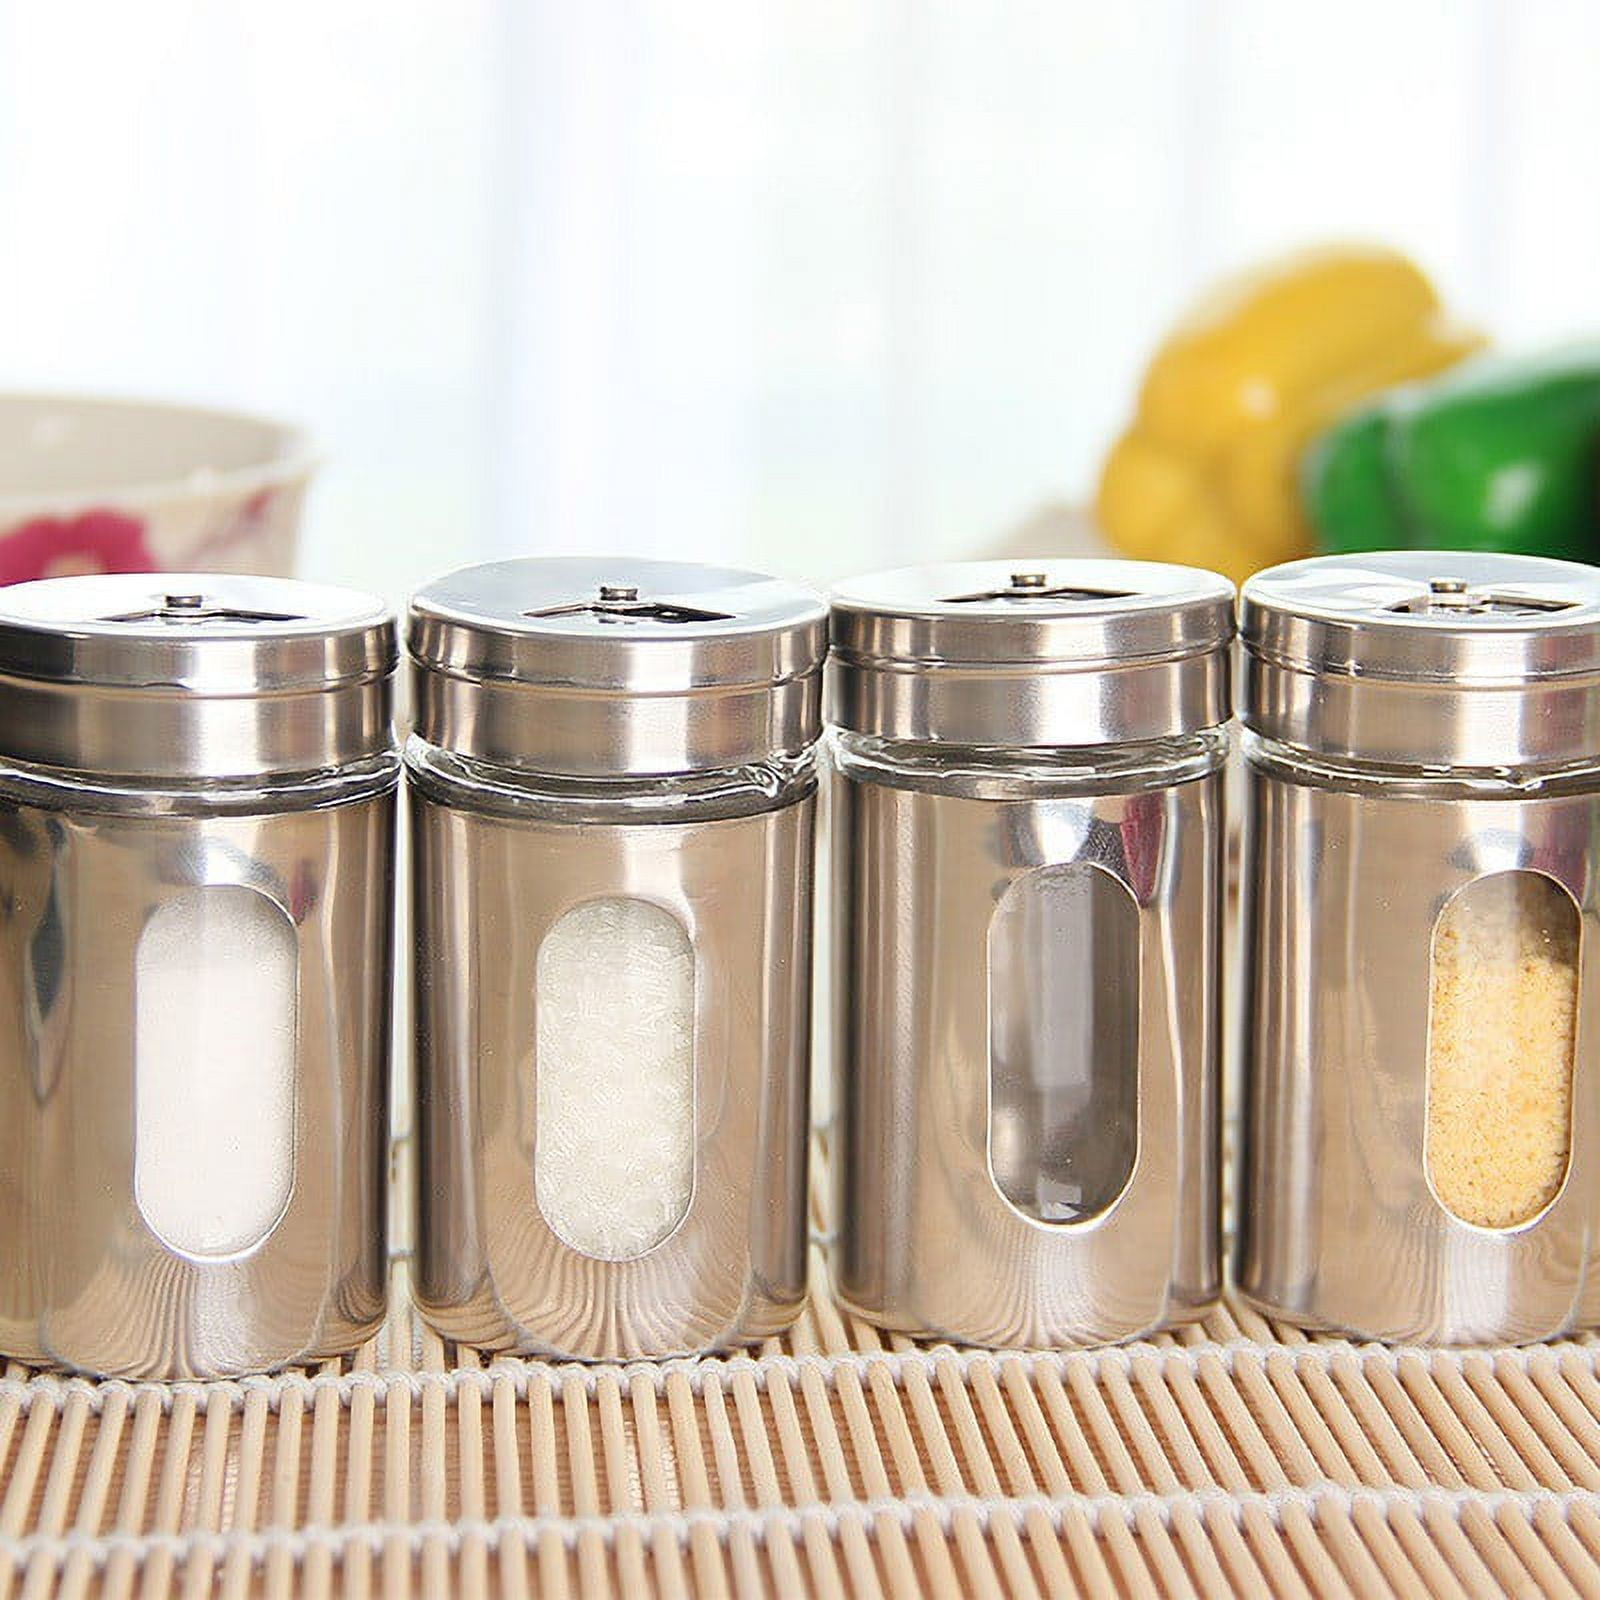 XIUDI Glass Spice Jars(3 piecesset)，Seasoning Containers with 304 Stainless  Steel Lids and Spoons，Clear Glass Condiment Canisters Pots Seasoning Box